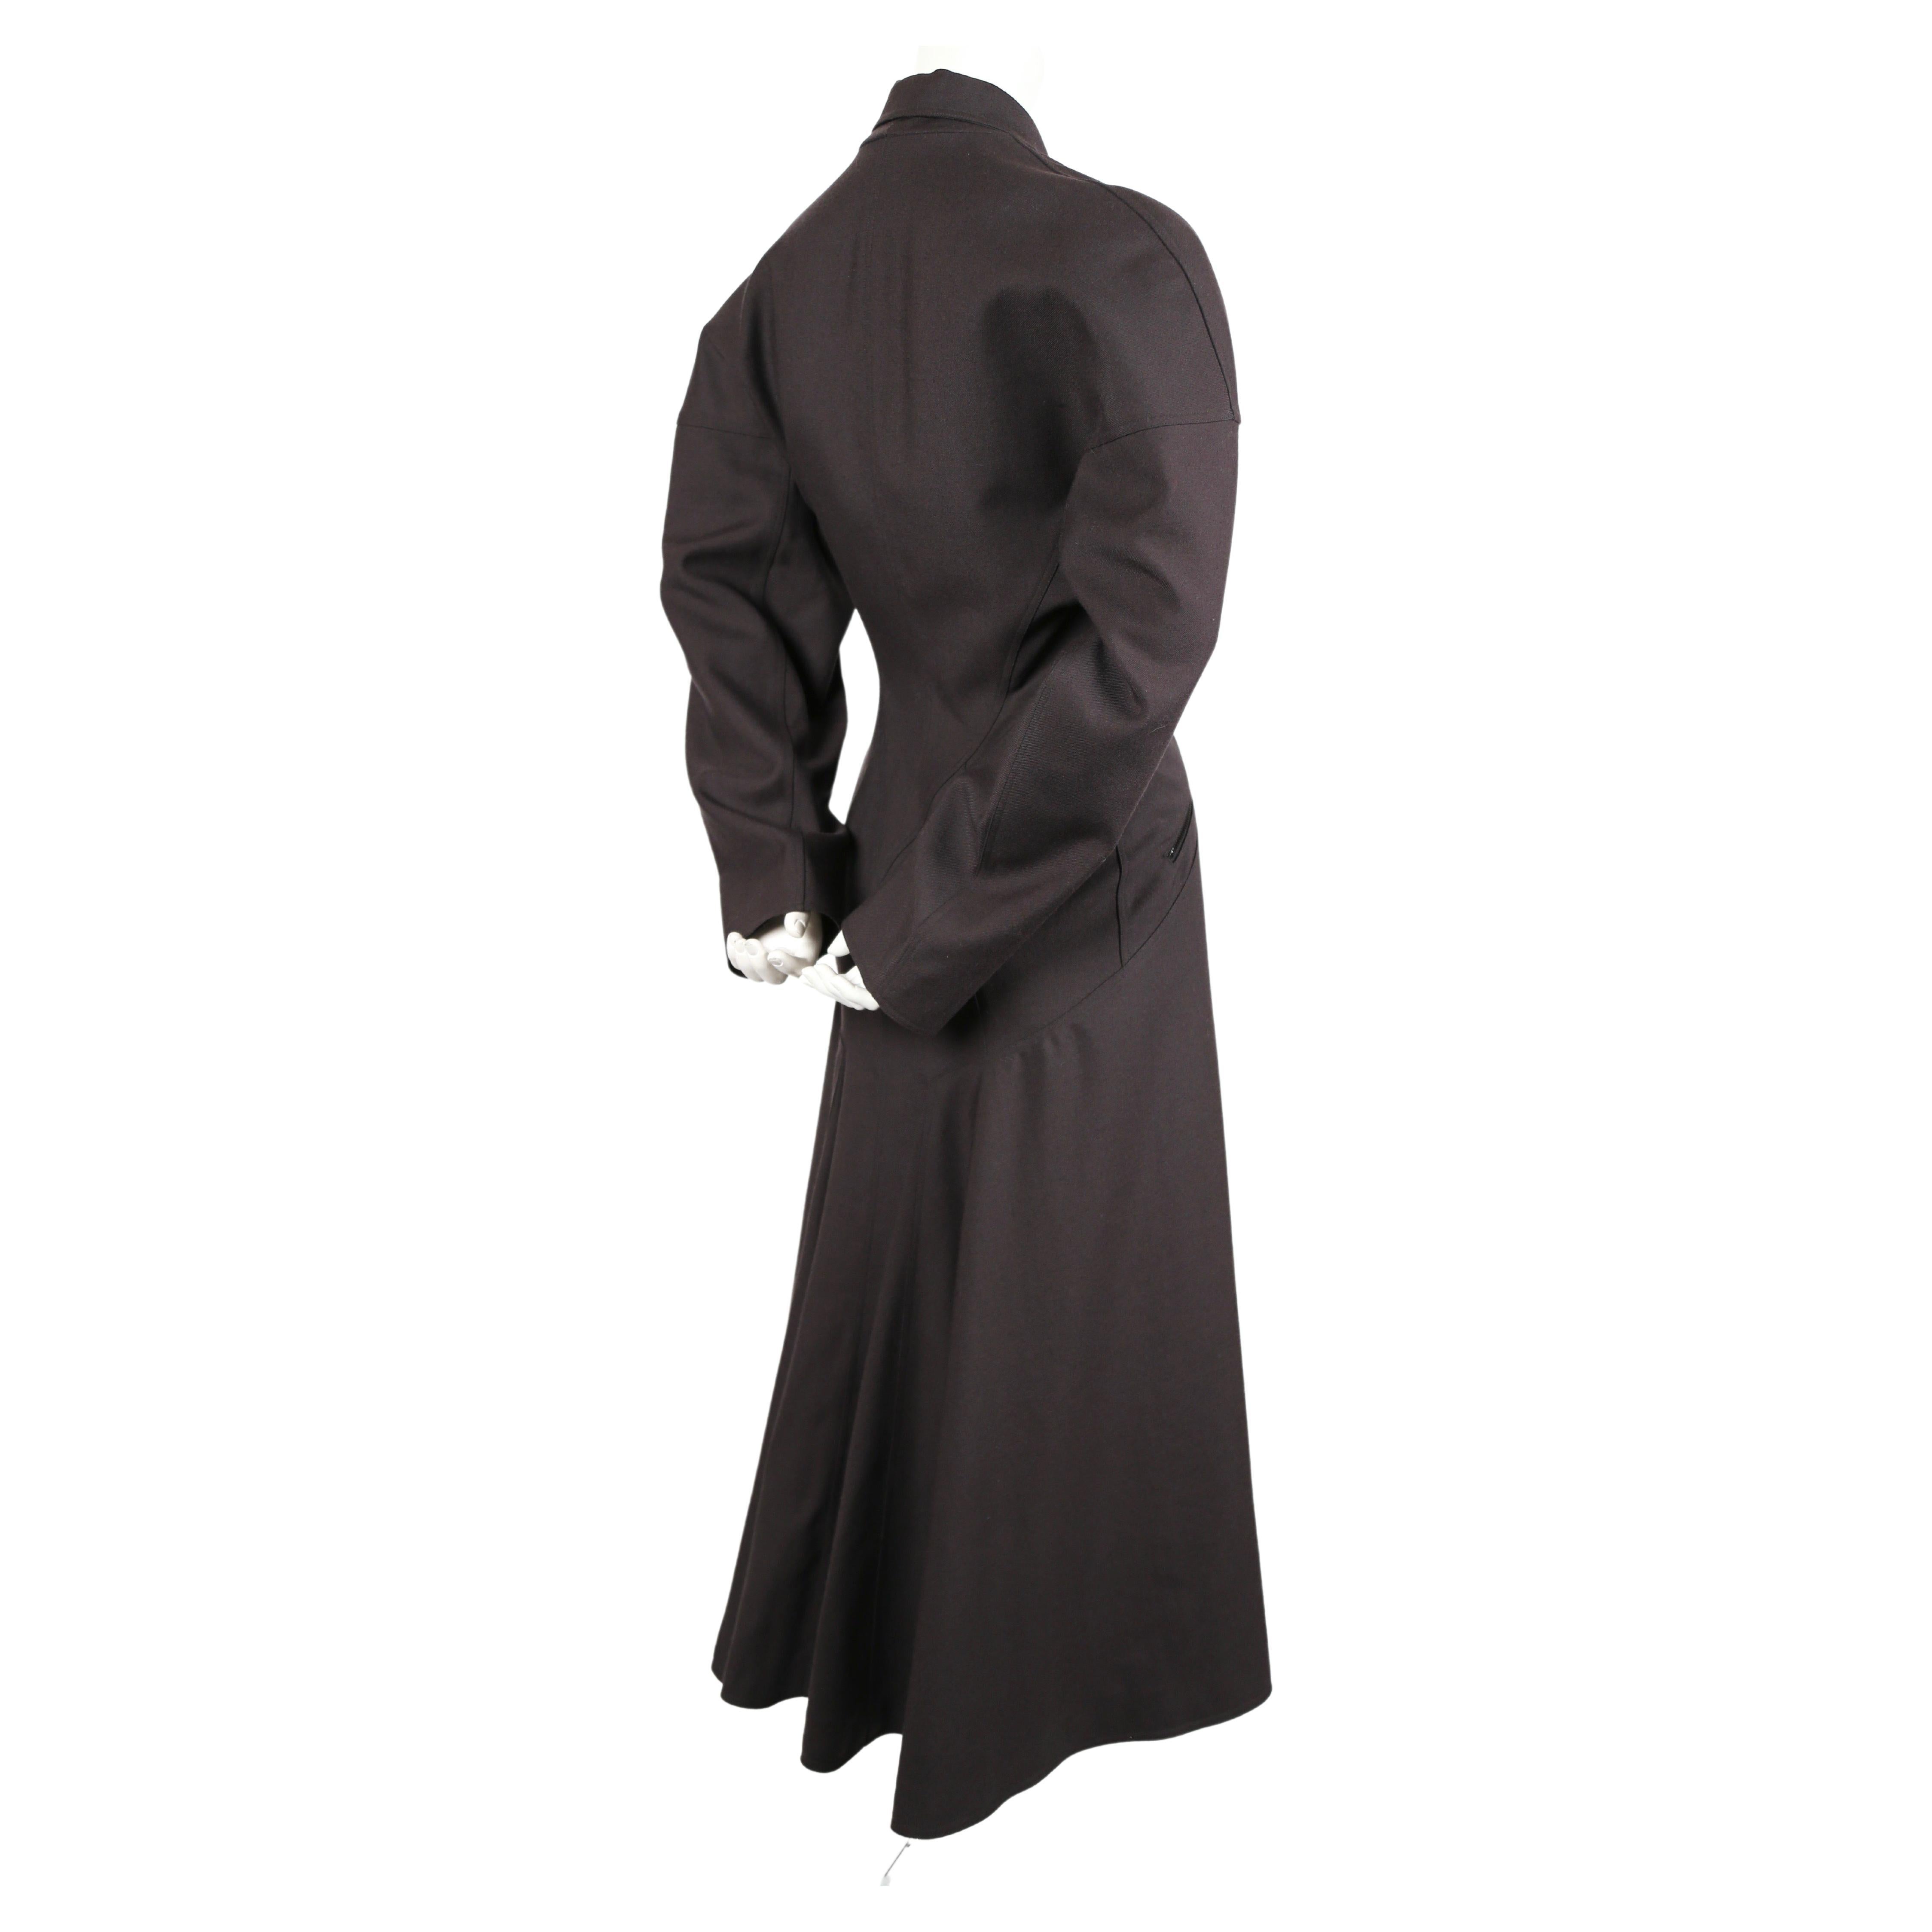 1986 AZZEDINE ALAIA charcoal wool gabardine RUNWAY coat with seamed back  In Good Condition For Sale In San Fransisco, CA